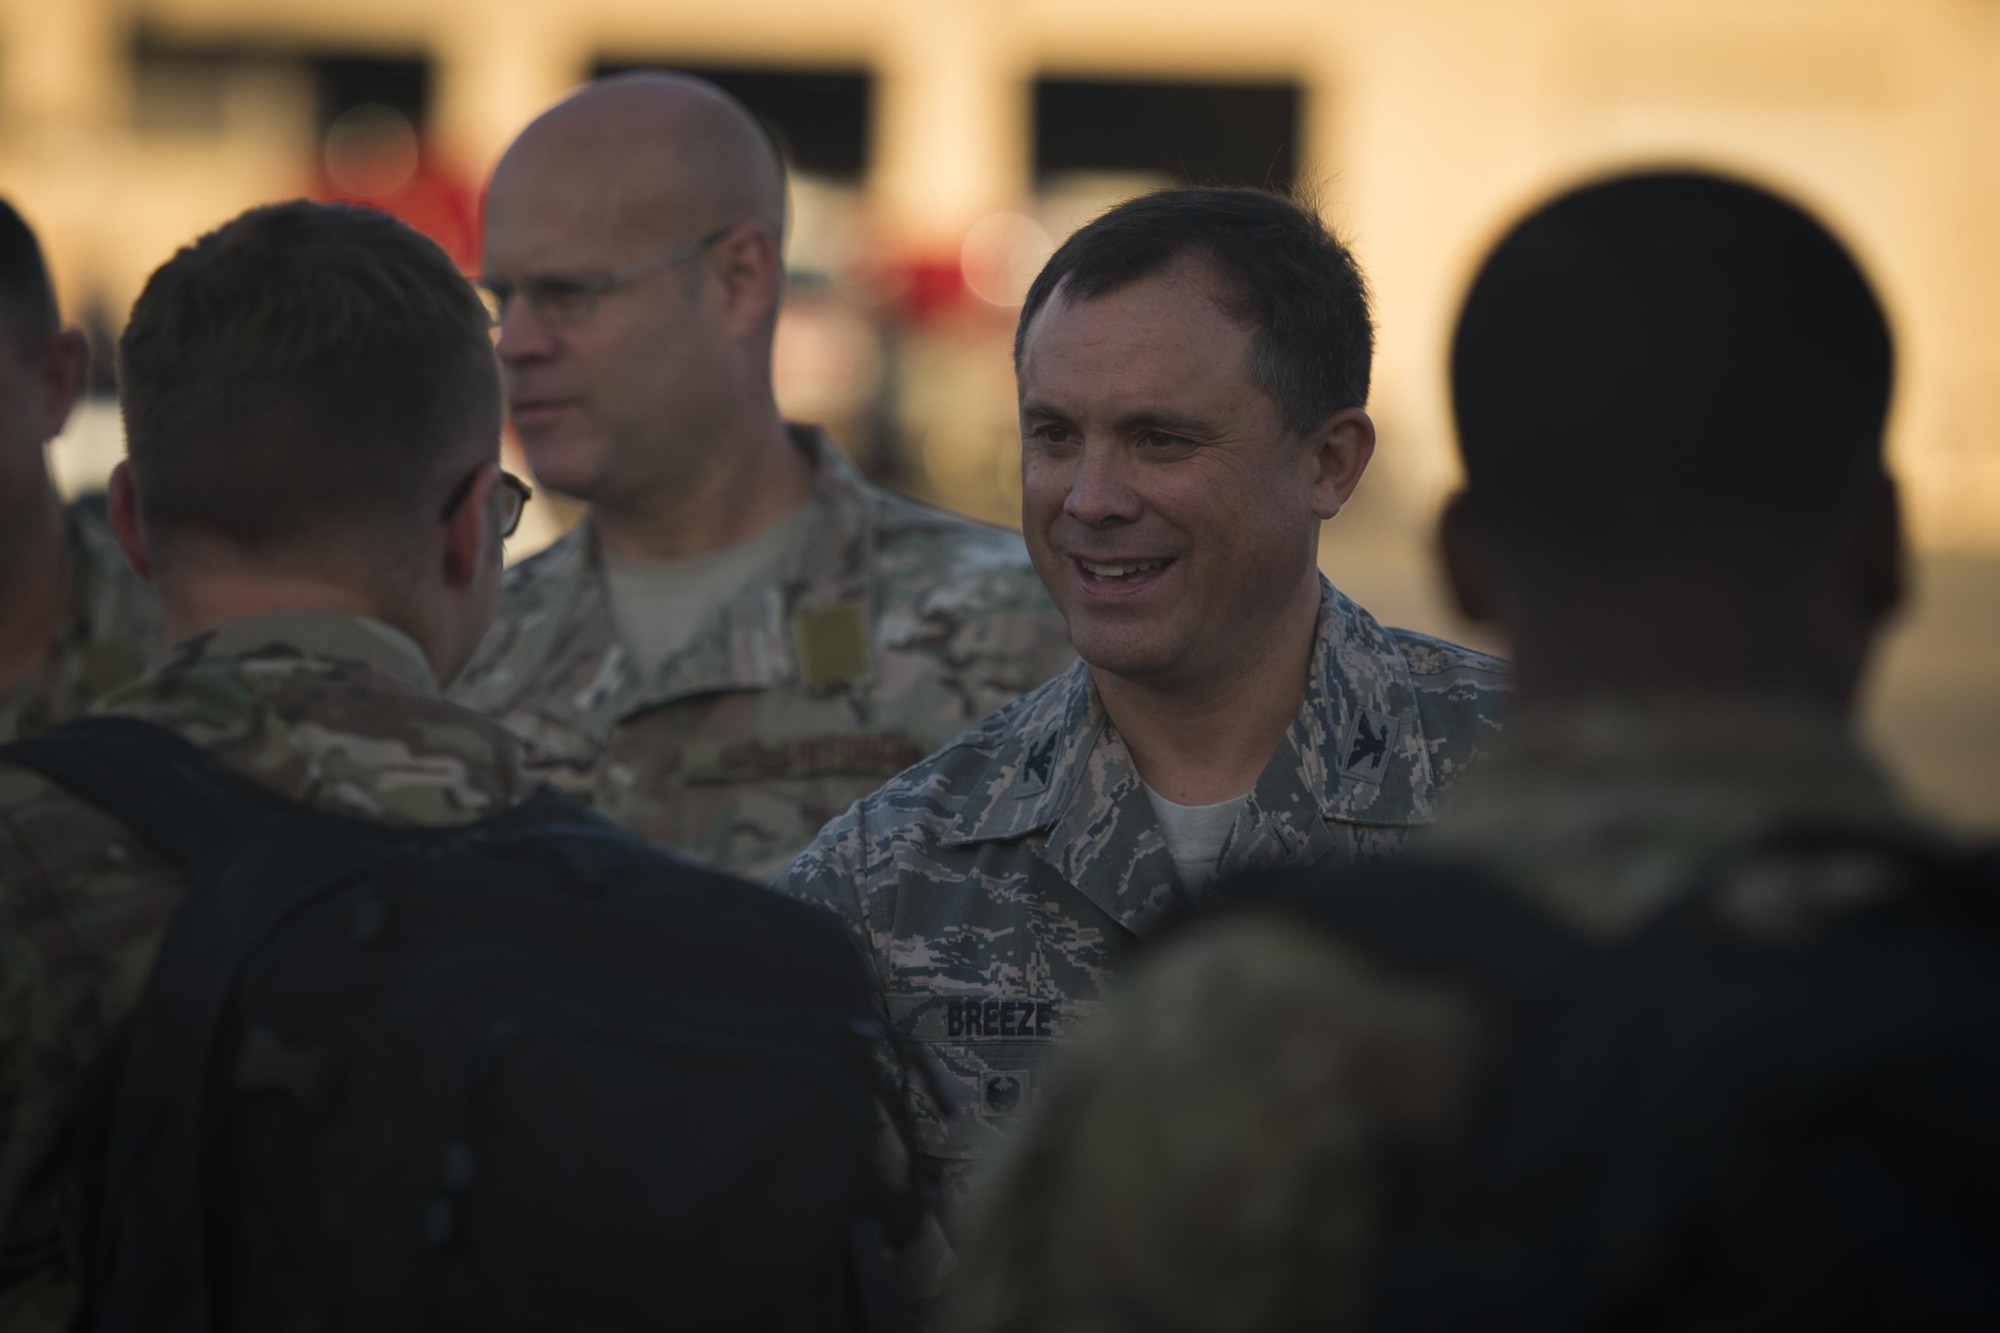 Col. Steven Breeze, vice commander of the 1st Special Operations Wing, greets Air Commandos at Hurlburt Field, Fla, Dec. 13, 2016. More than 125 Air Commandos were greeted as they returned from deployment by family and friends. (U.S. Air Force photo by Airman 1st Class Joseph Pick)